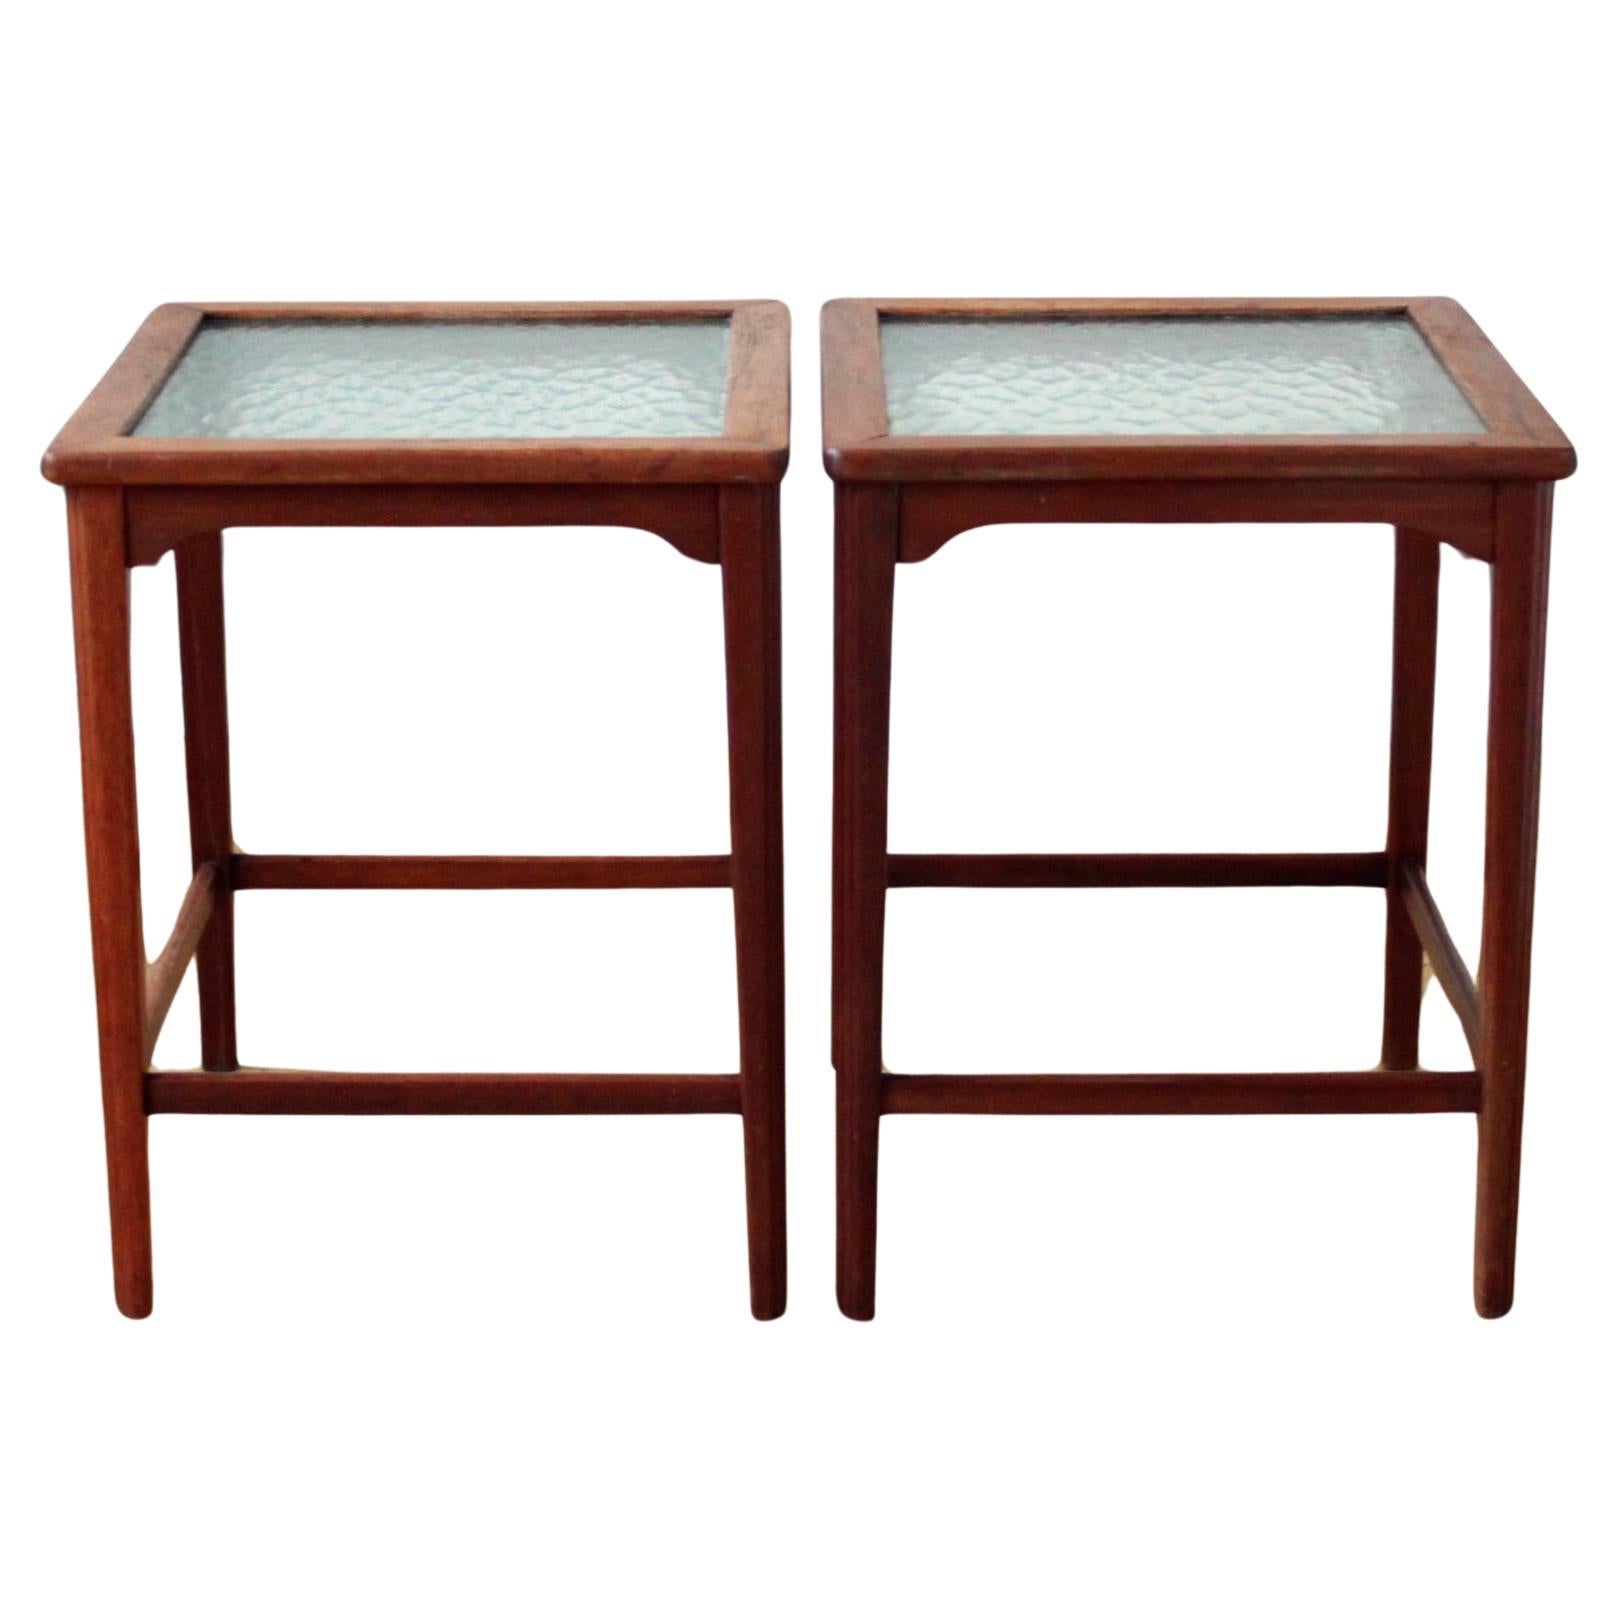 Pair of Scandinavian Modern Side Tables, Mahogany and Decorative Glass, 1940s 